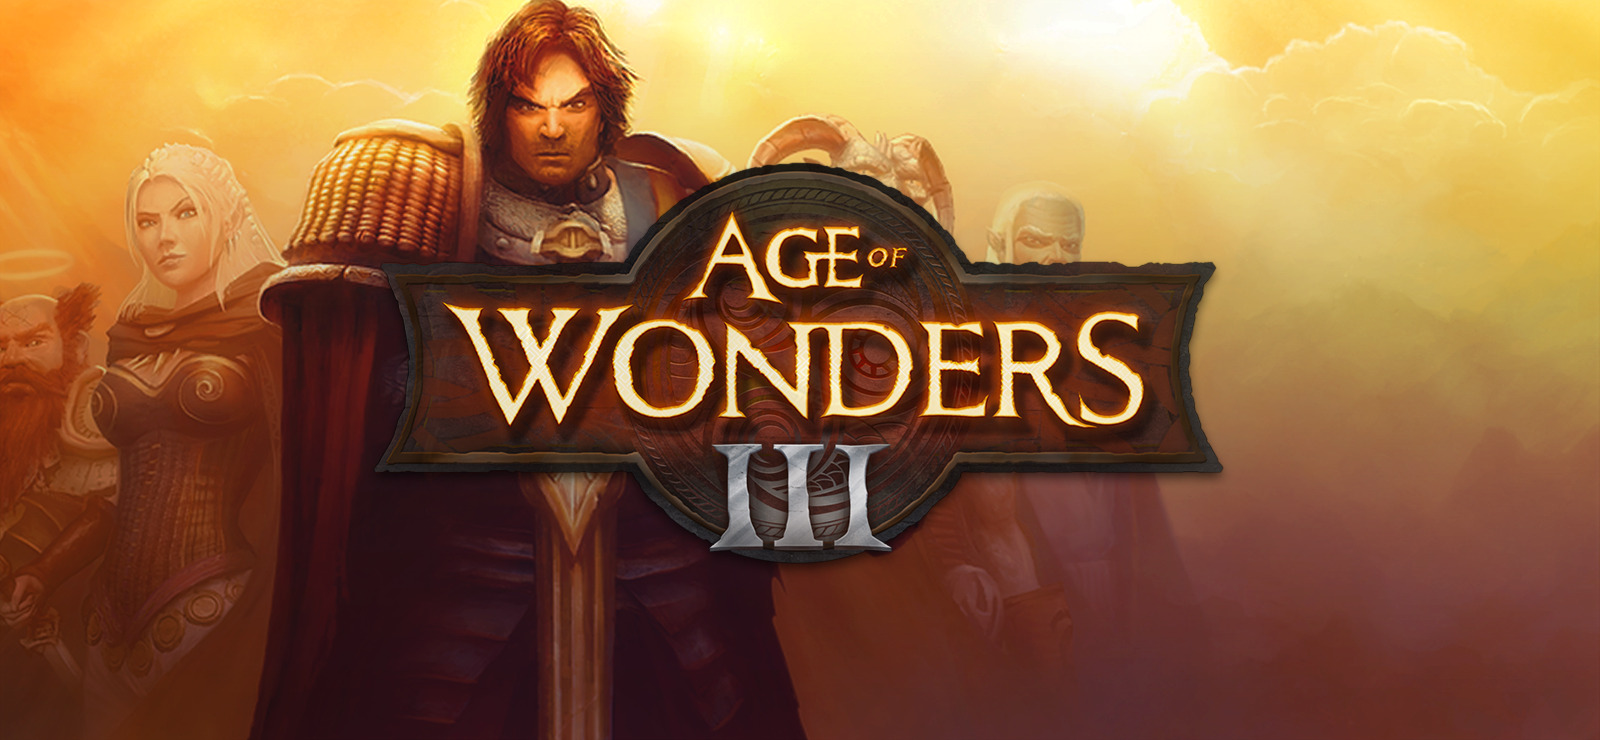 age of wonders 3.steam guides